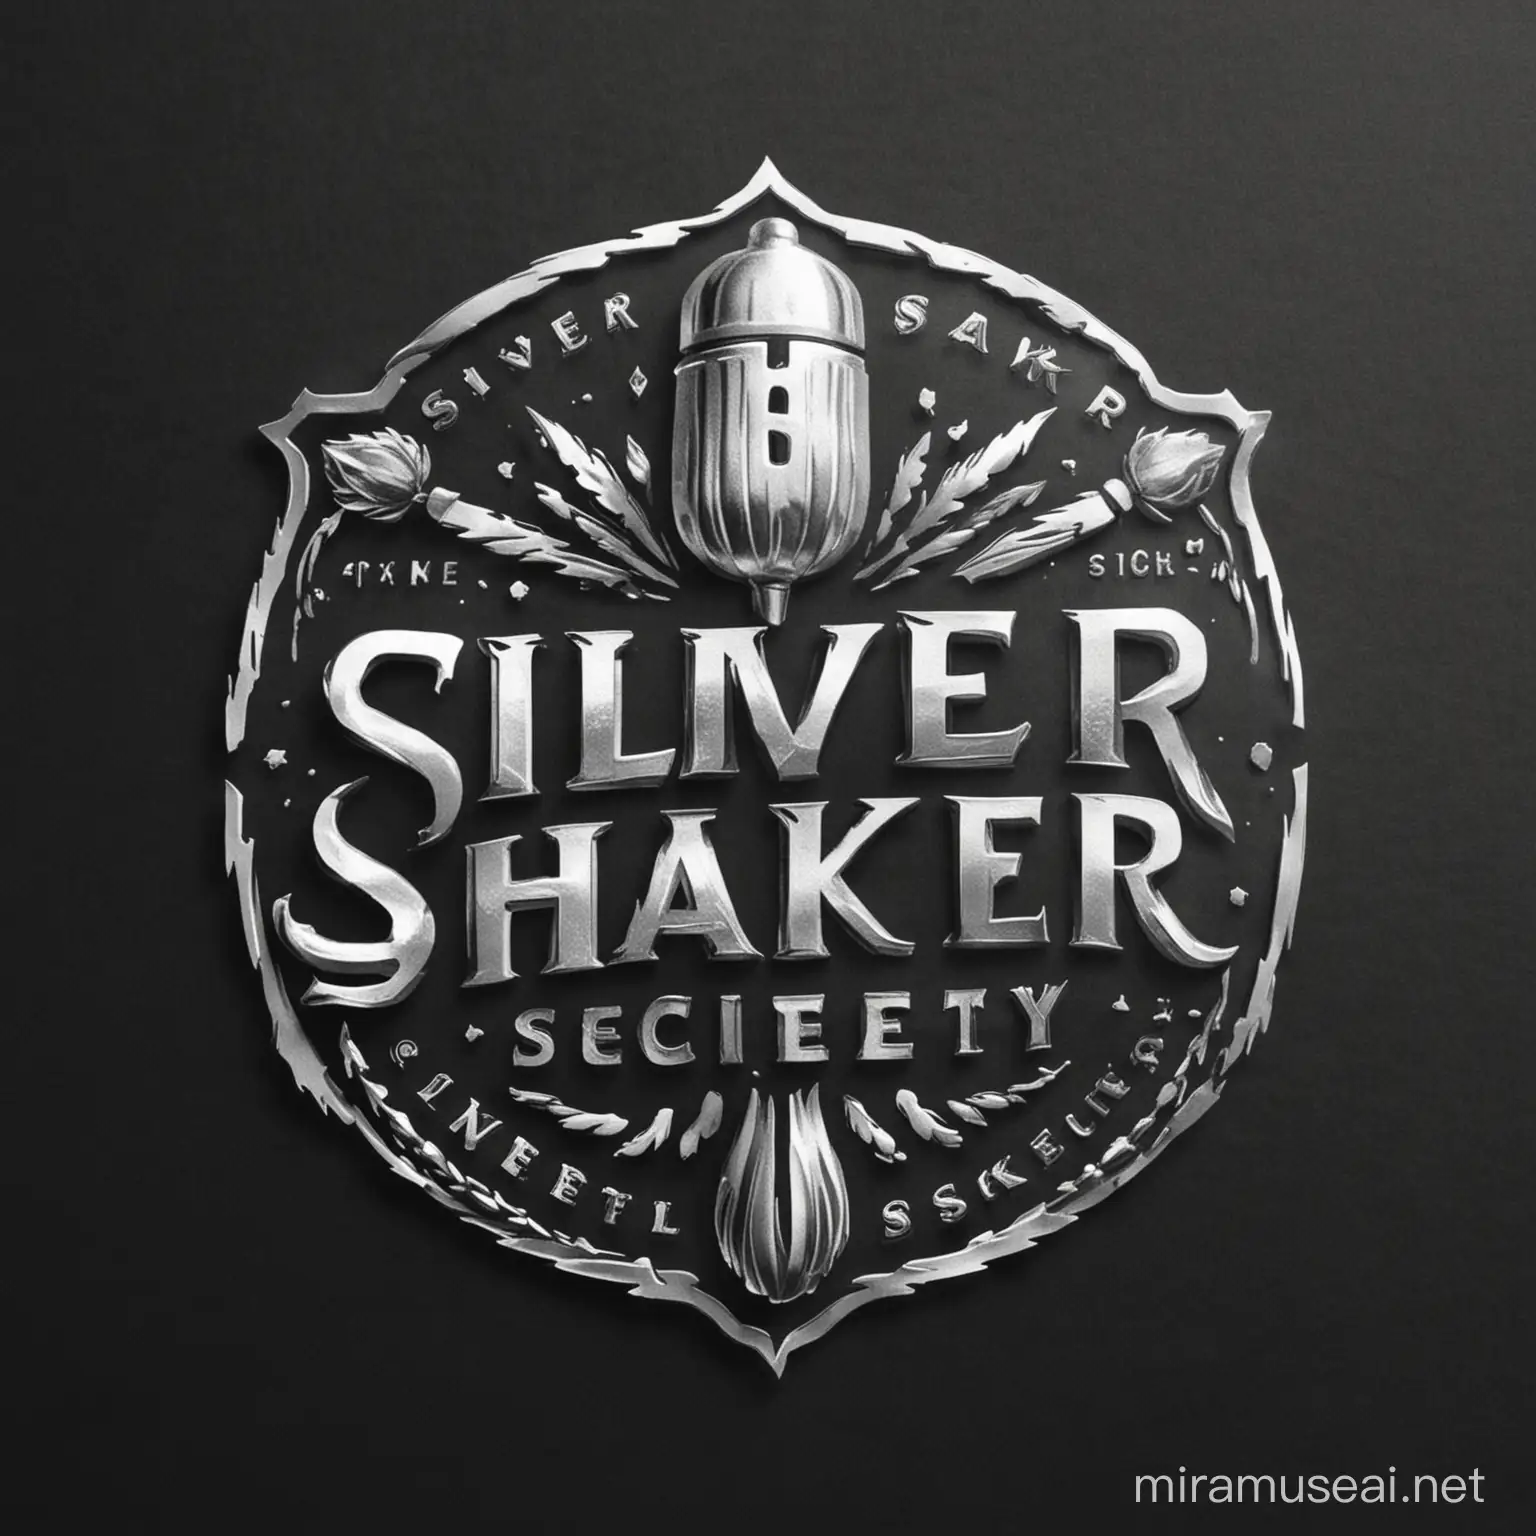 Elegant Craft Cocktail Product Company Logo with Silver Shaker Theme